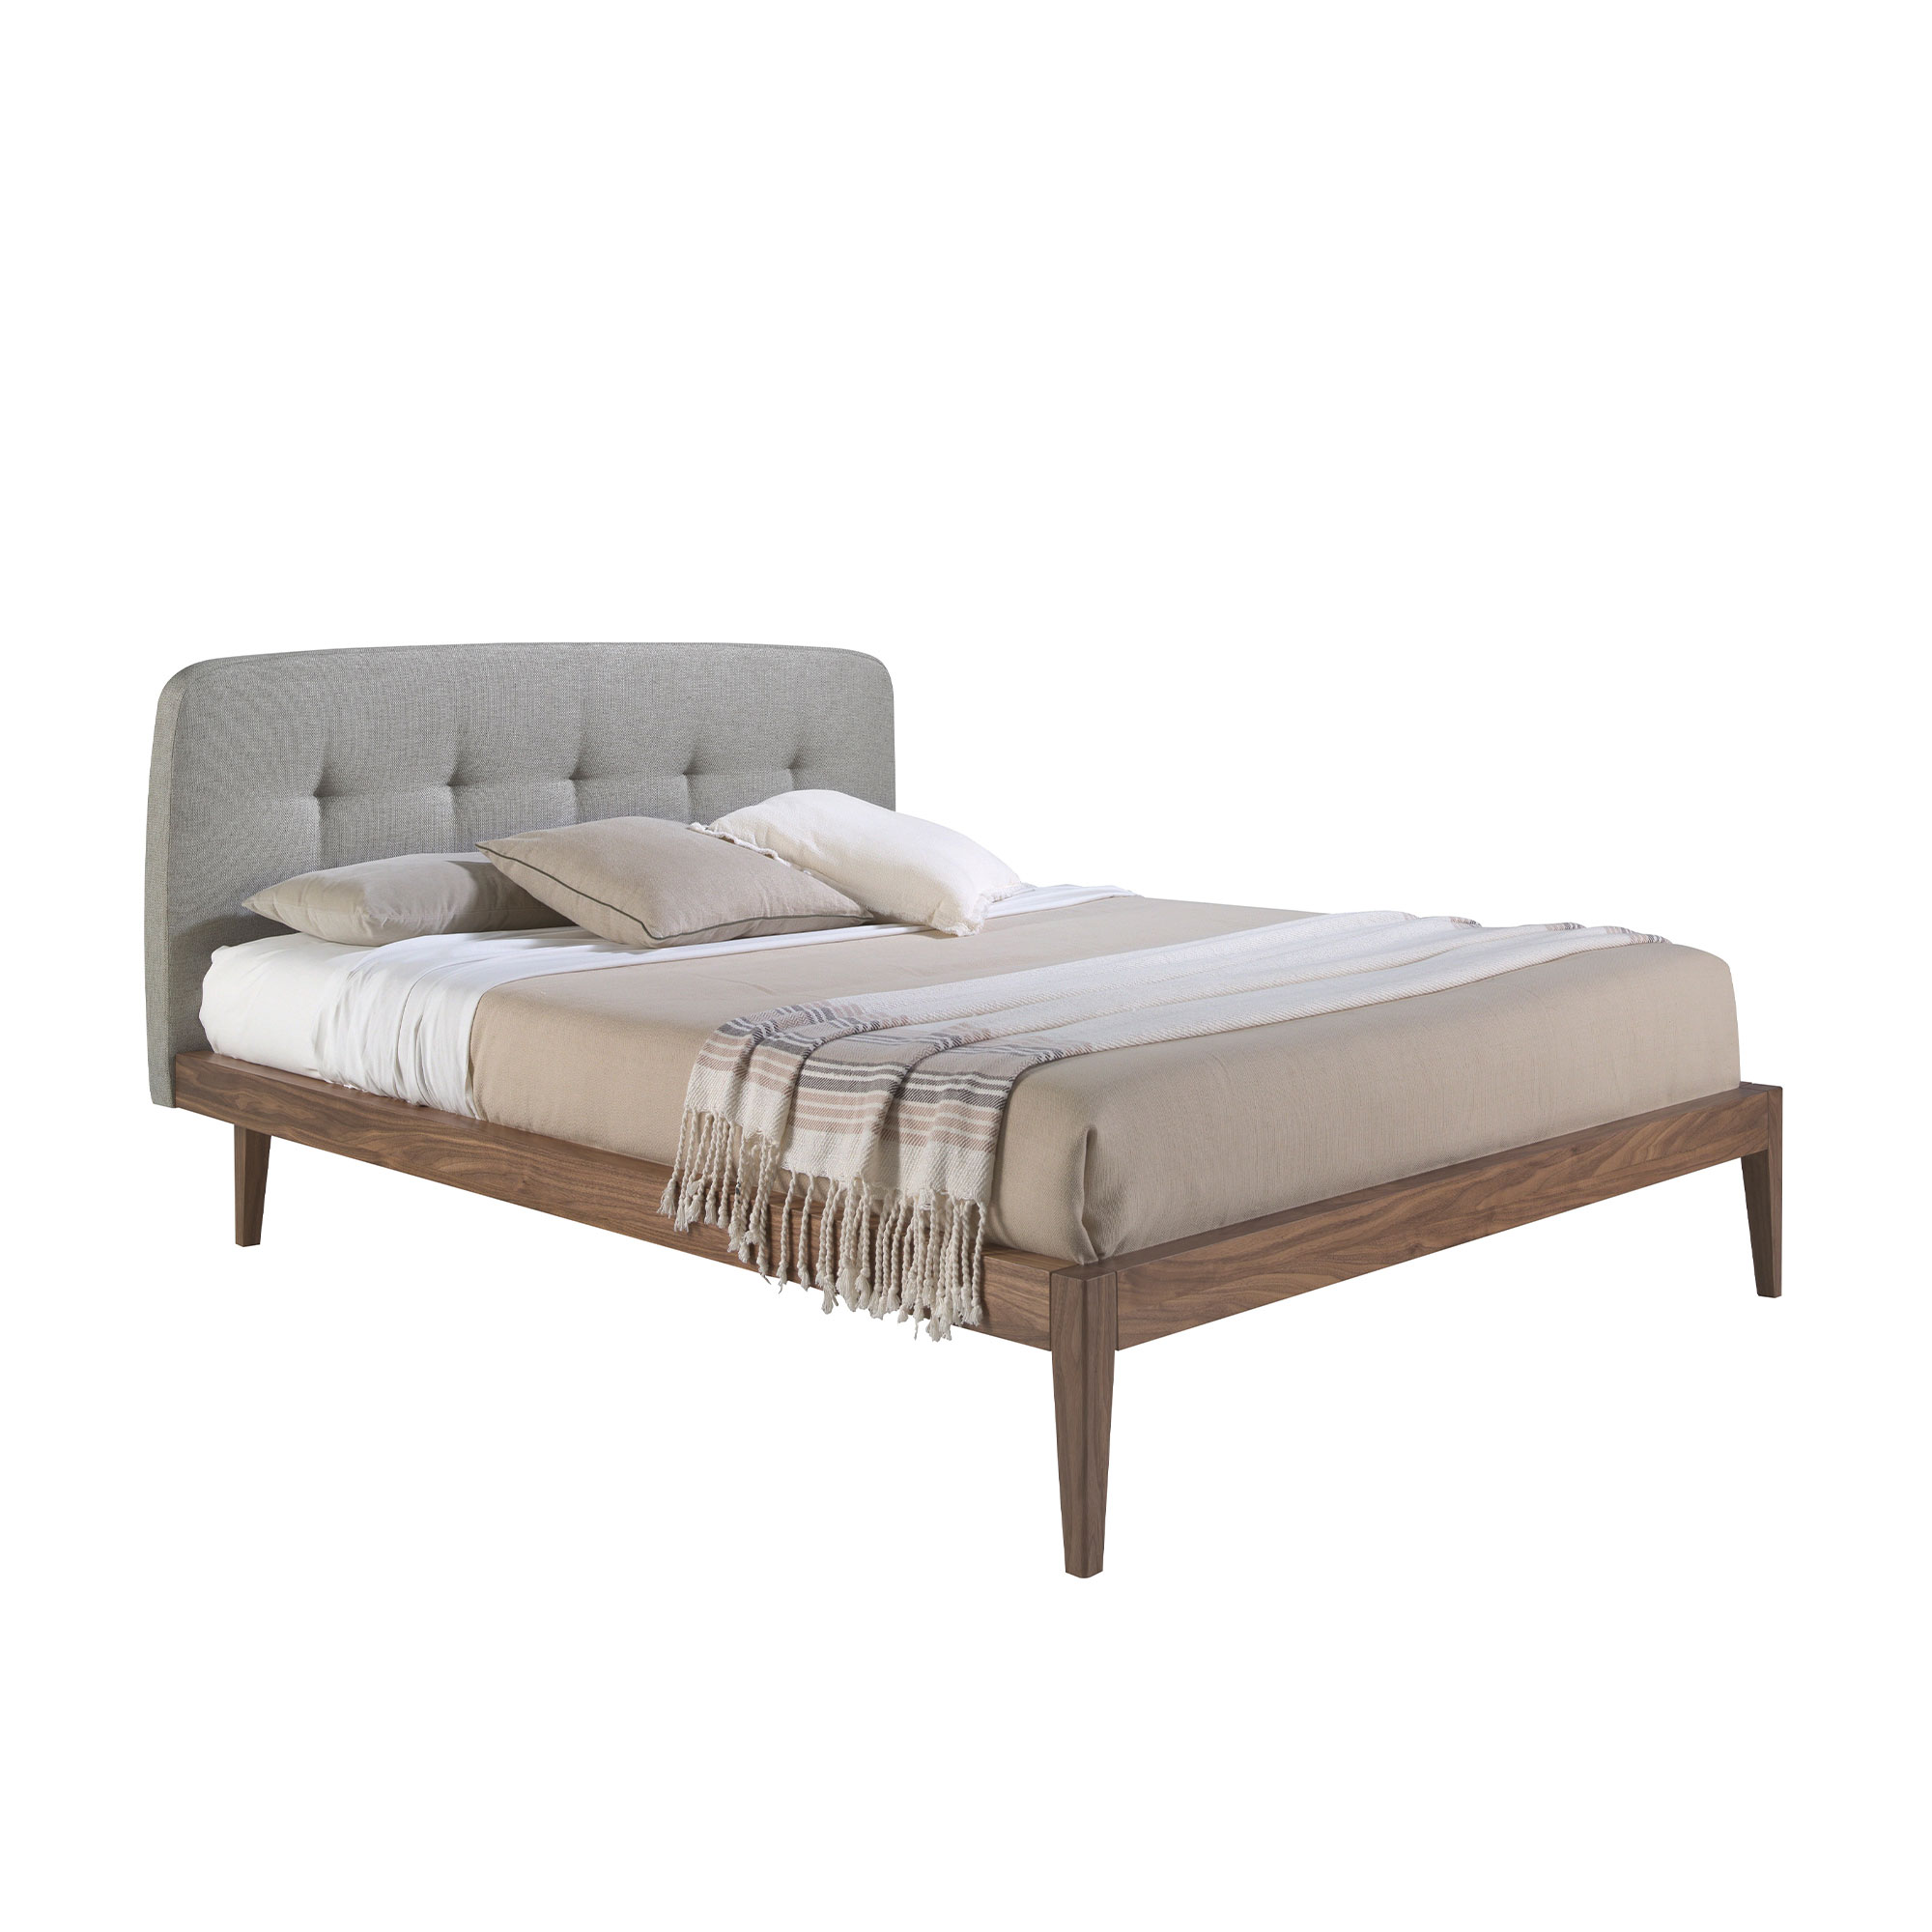 Grey fabric tufted bed 160 x 200